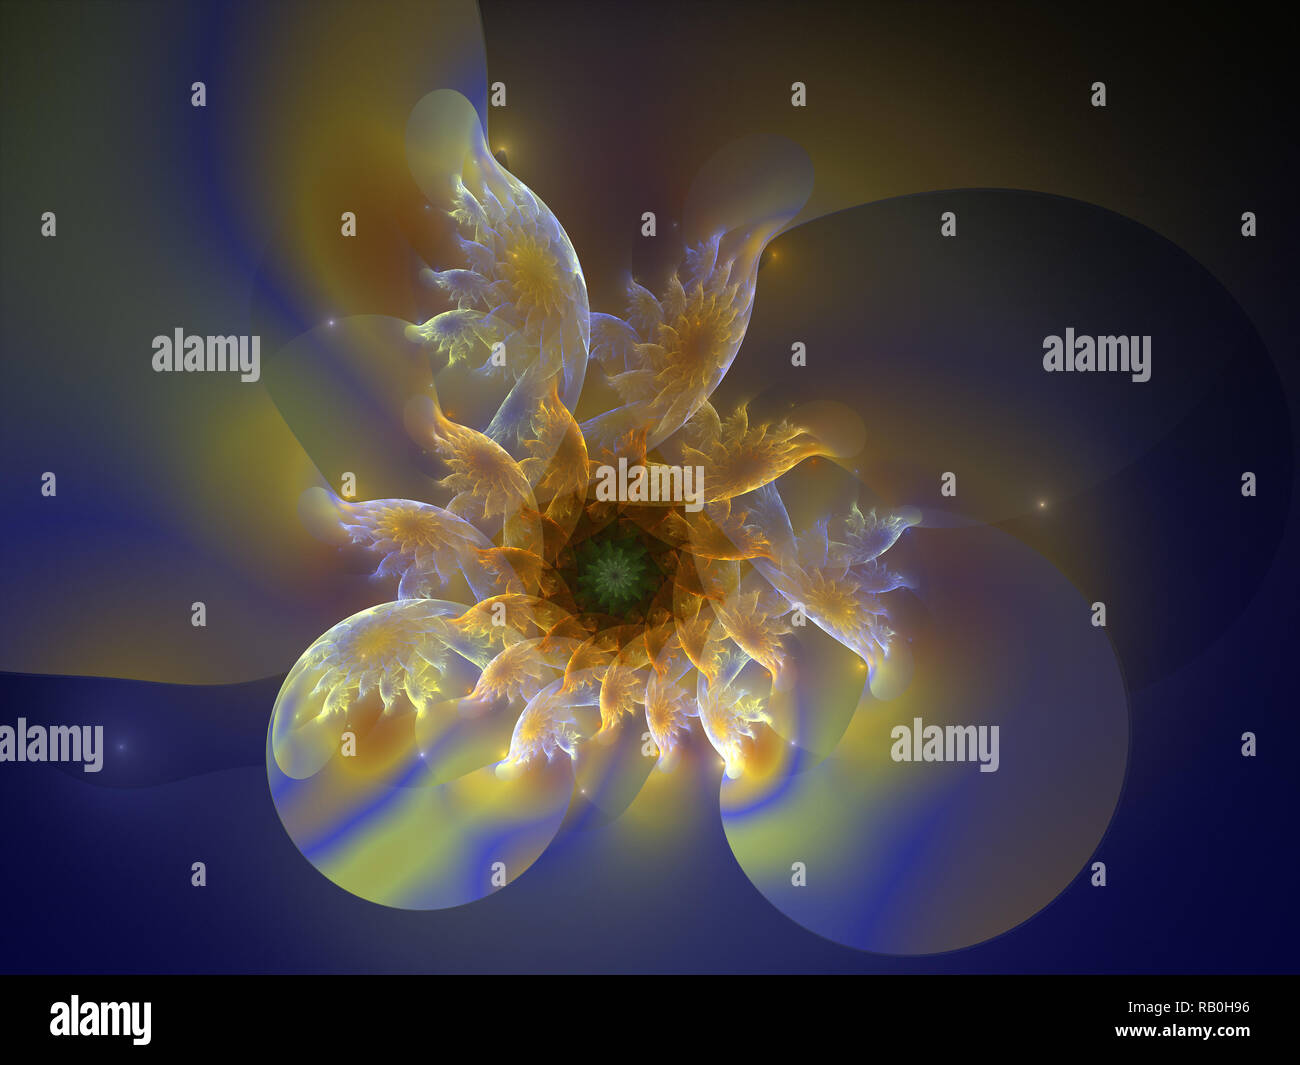 Yellow, Blue, and White Sunflower Spiral Flame Fractal Stock Photo